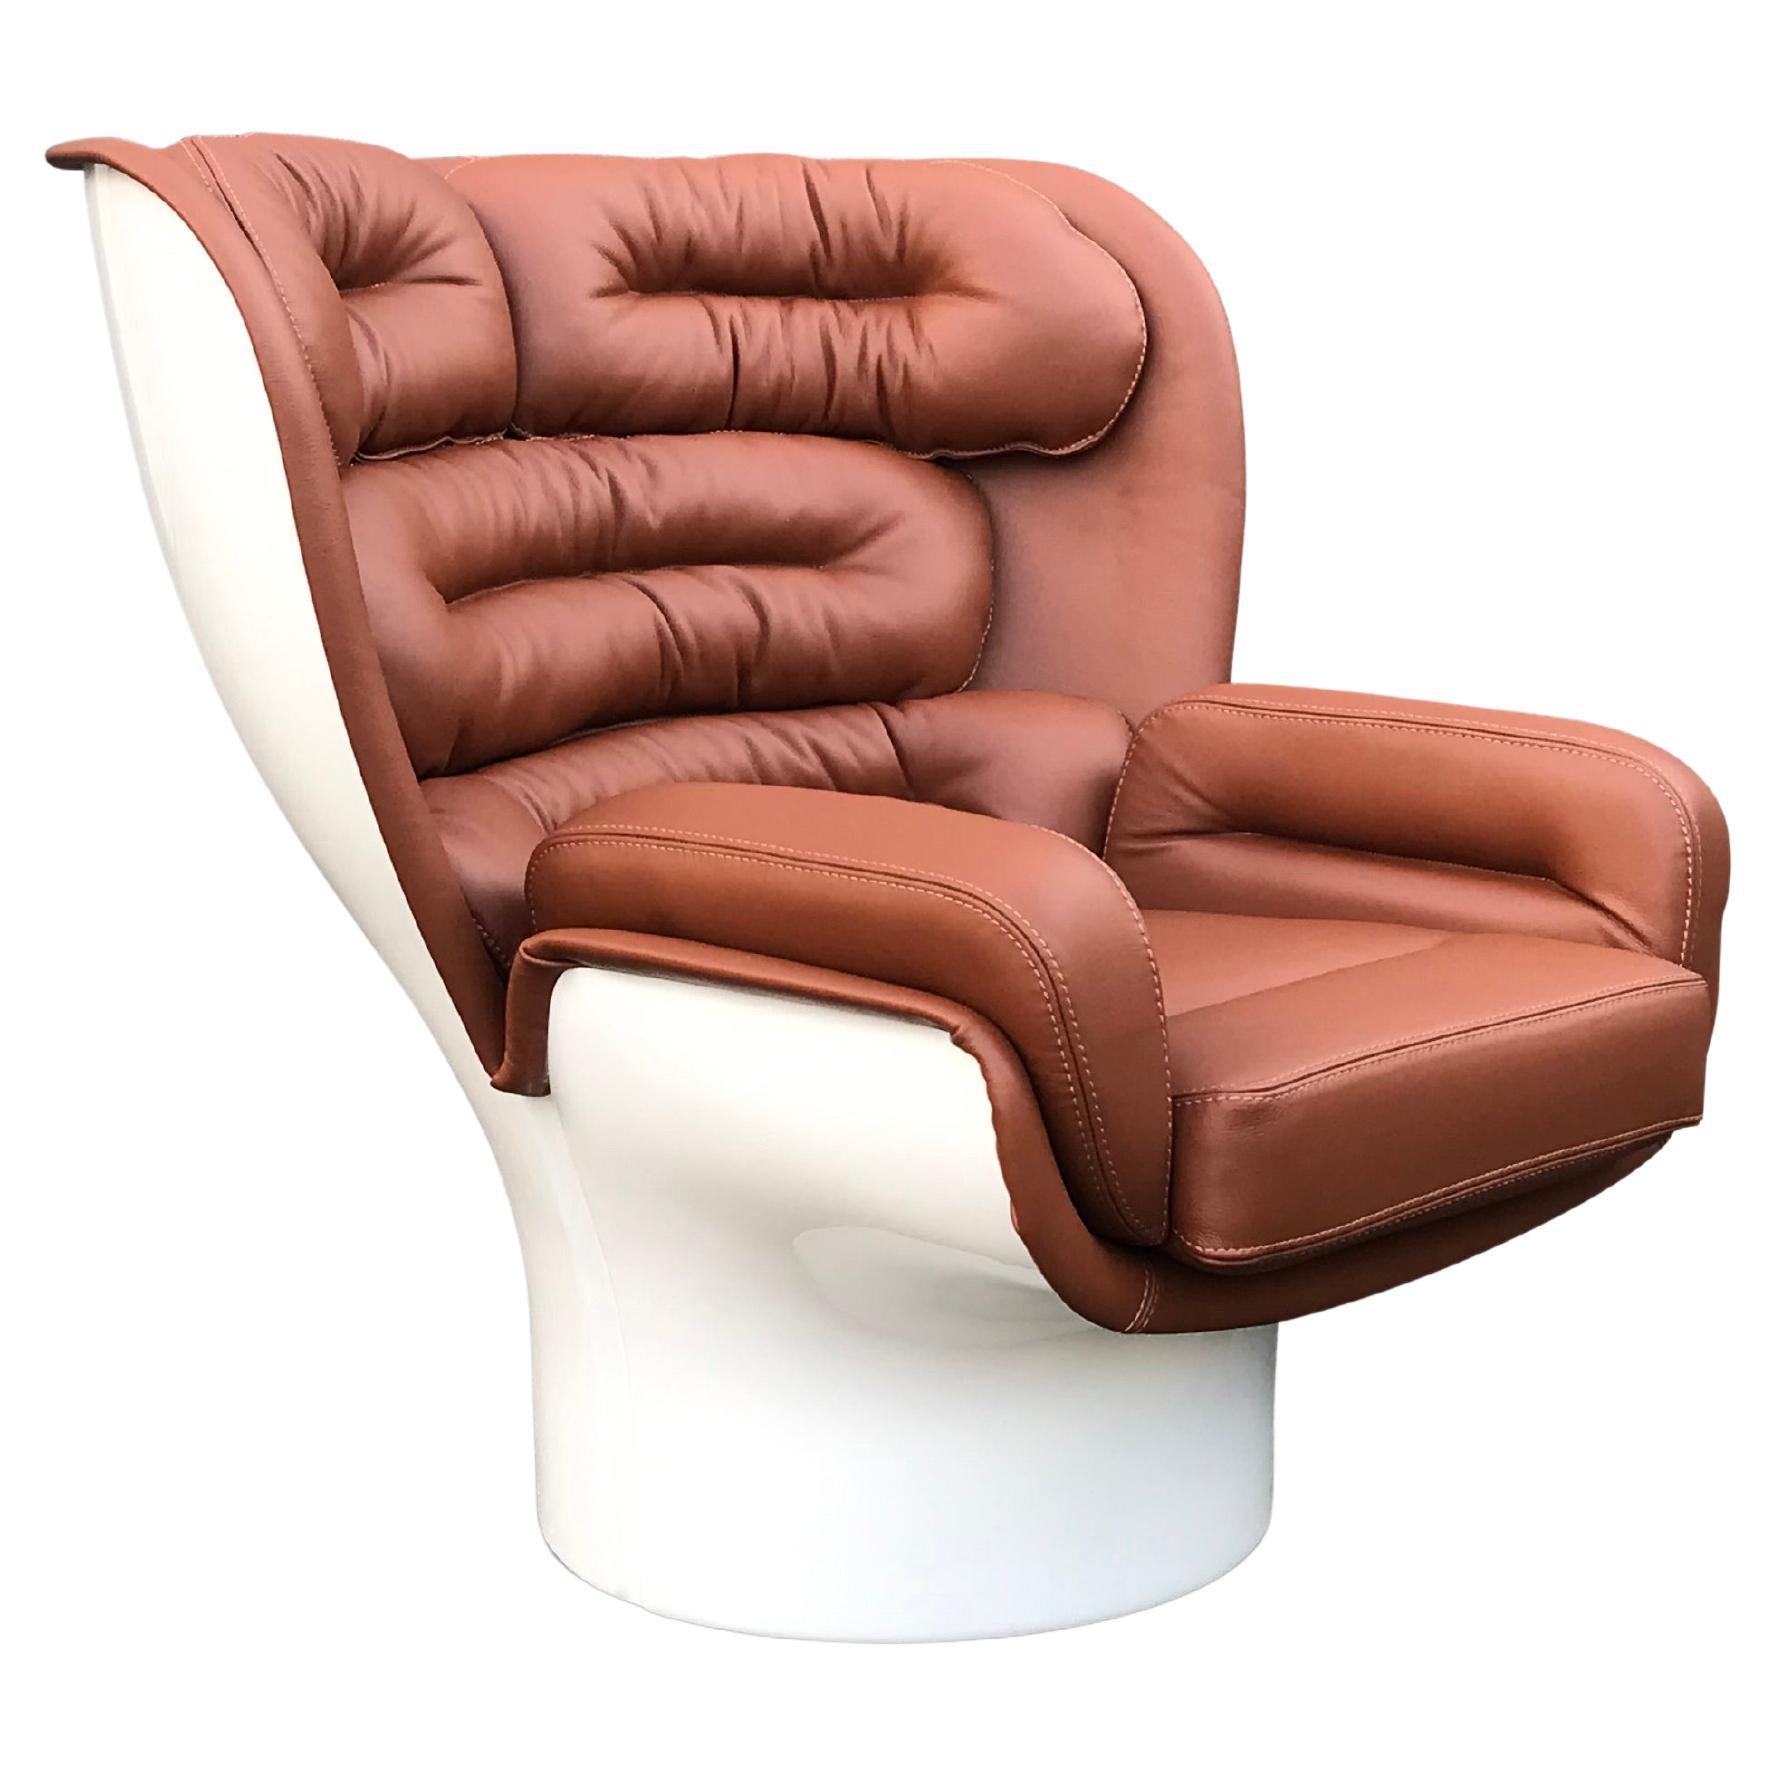 Cognac leather and white Elda chair by Joe Colombo for Longhi Italy